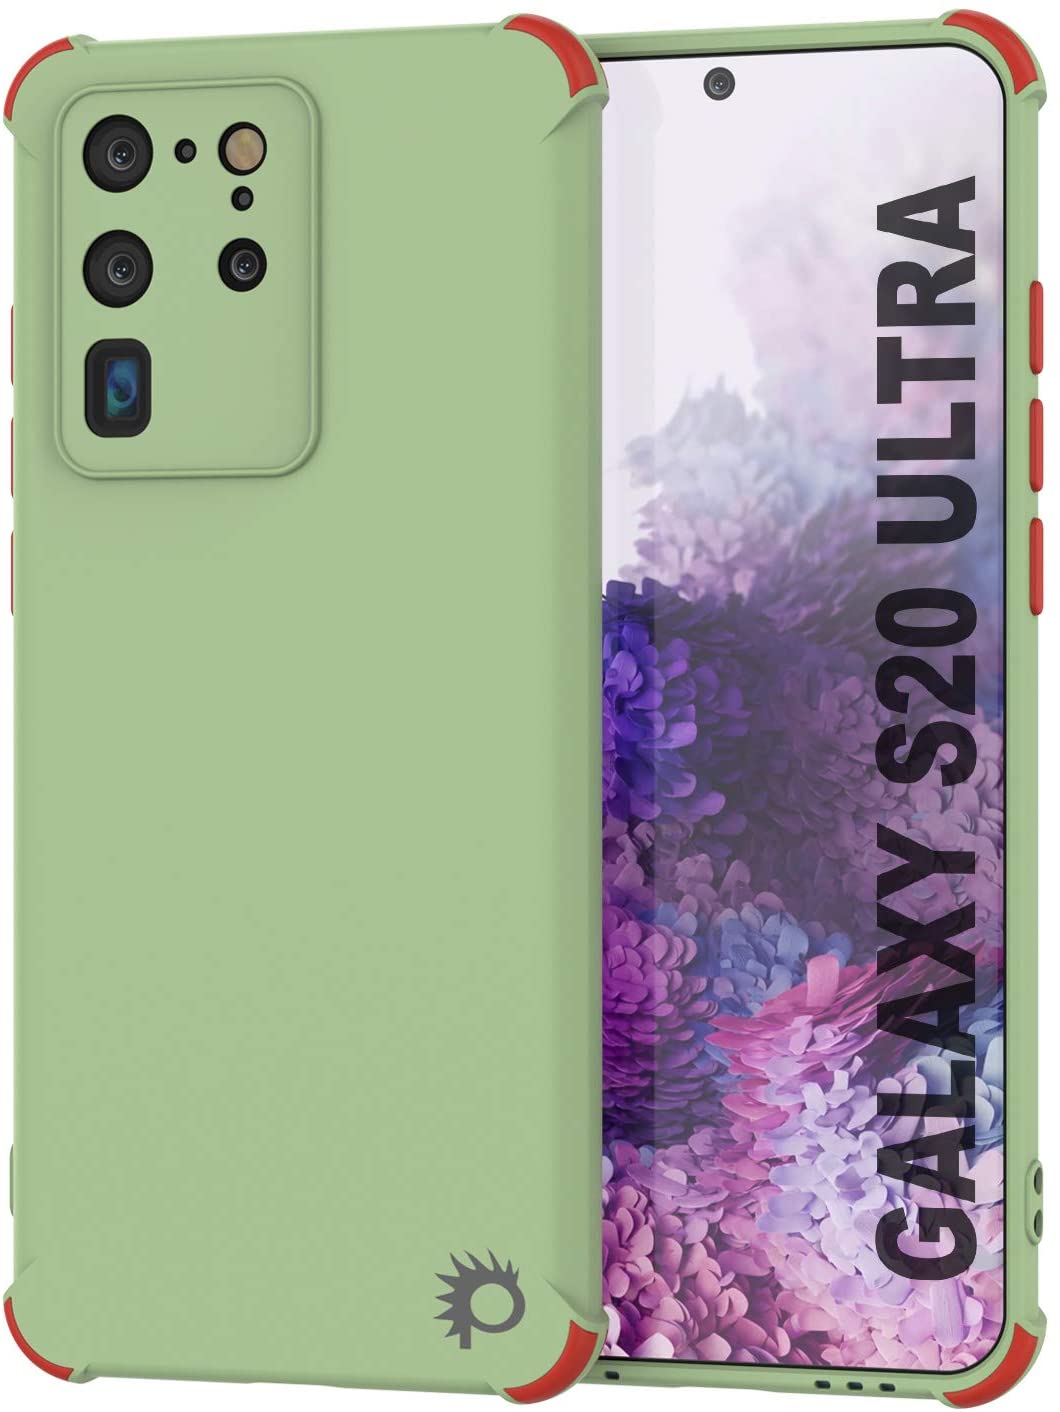 Punkcase Protective & Lightweight TPU Case [Sunshine Series] for Galaxy S20 Ultra [Light Green] (Color in image: Light Green)